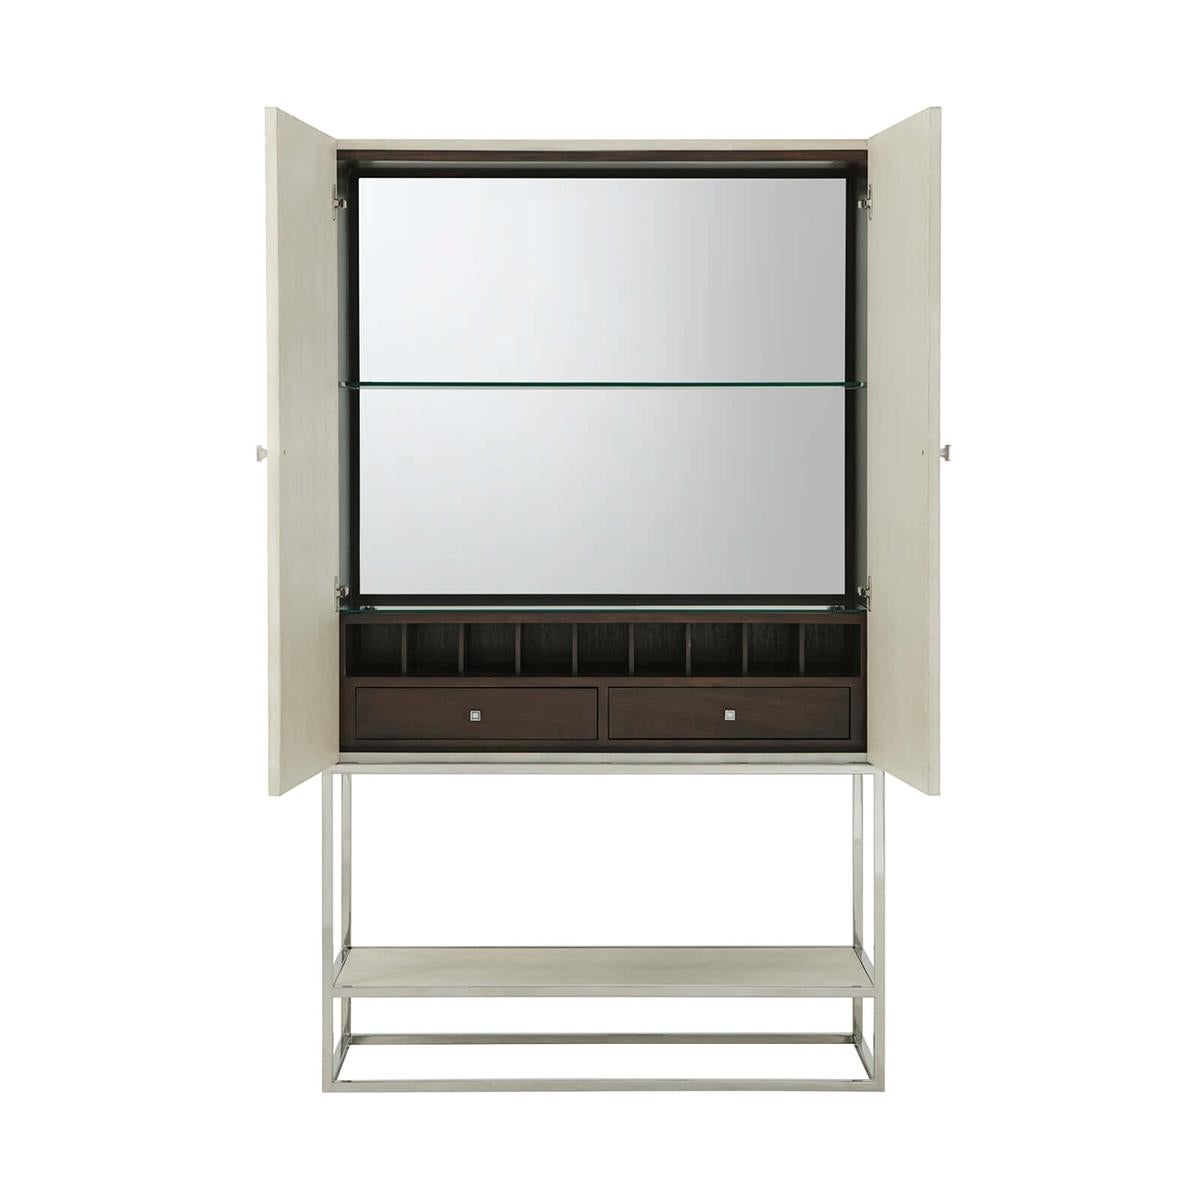 Mid-century Shagreen bar cabinet wrapped in our shagreen embossed leather overcast finish, the interior with a mirrored back and tempered glass shelf and fitted with pigeon holes and two drawers. The frame is a polished nickel finish and has a lower